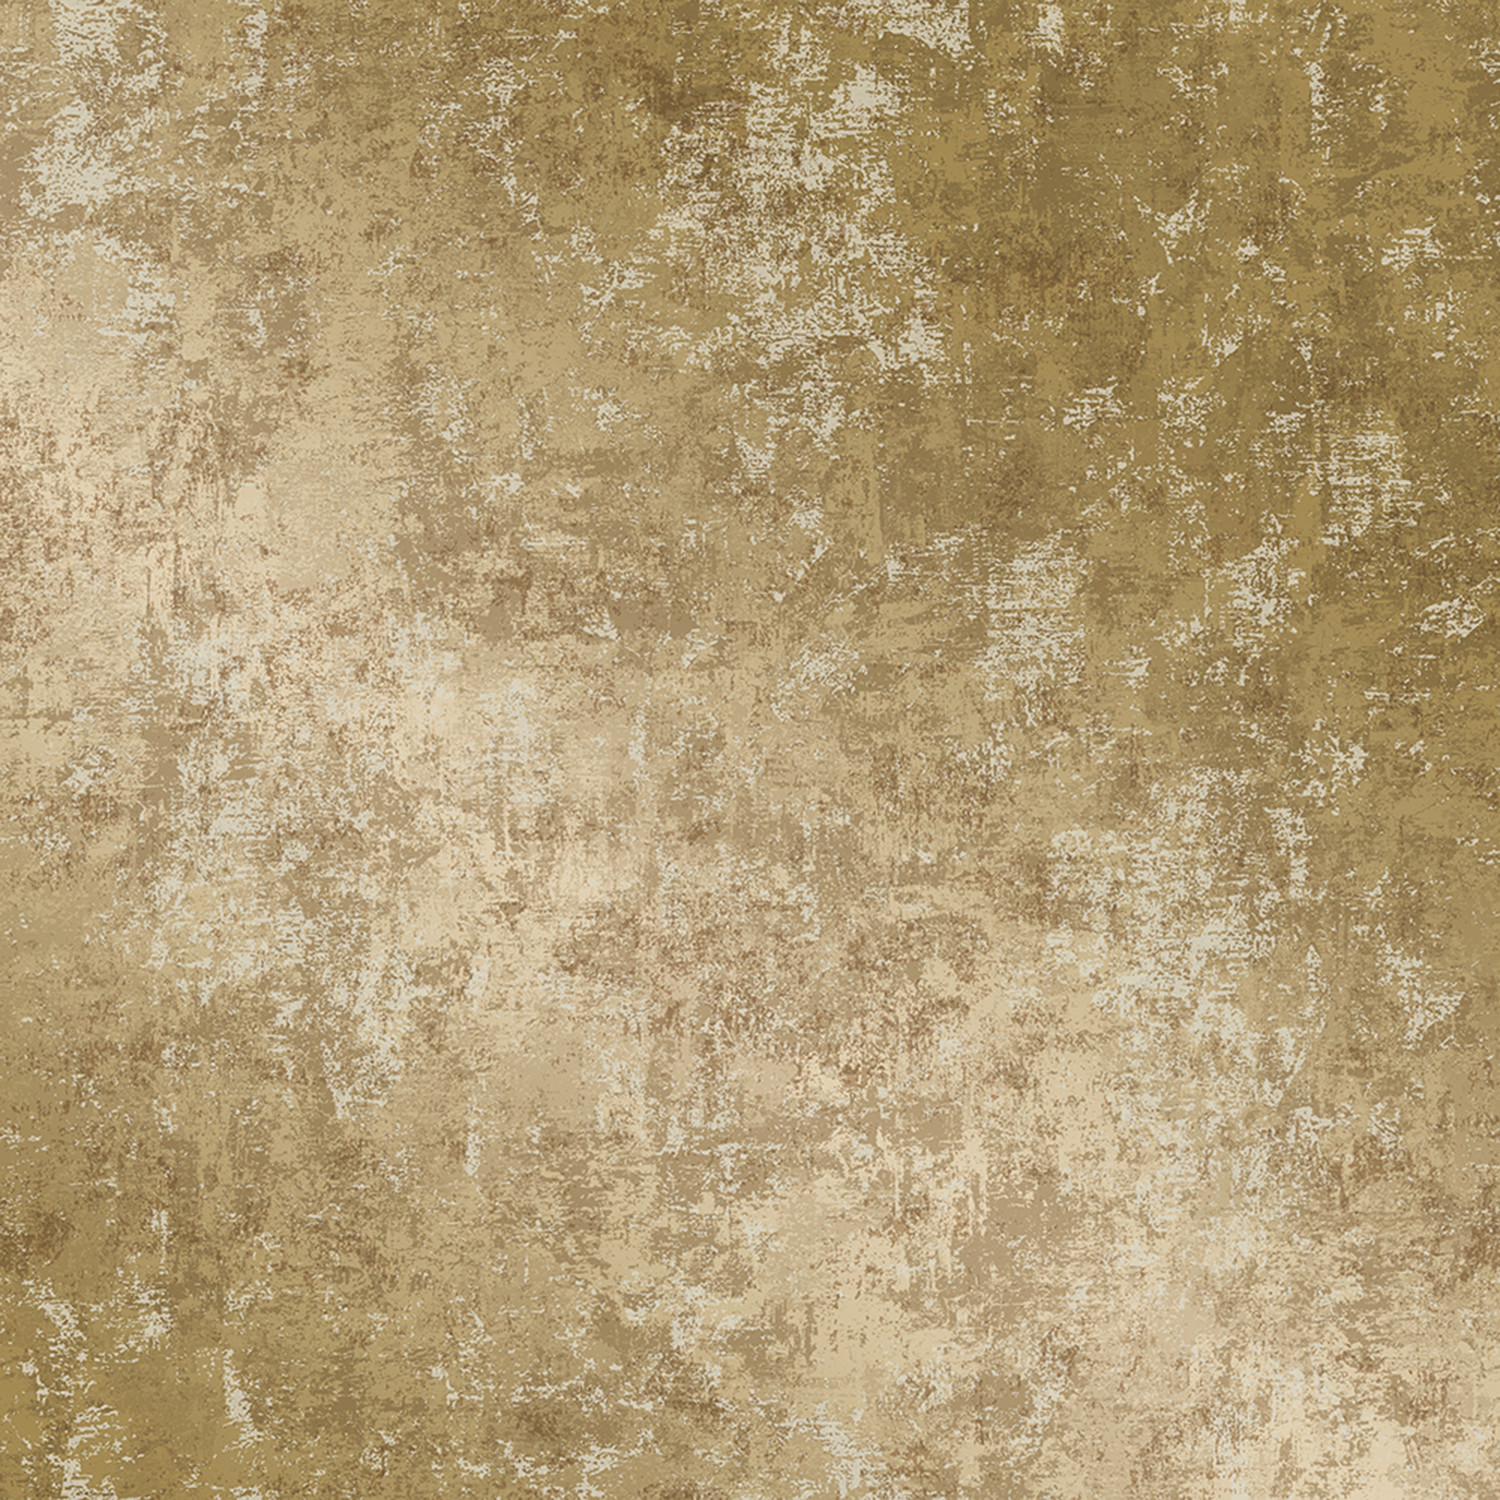 Distressed Gold Leaf // Self-Adhesive Wallpaper - Tempaper® - Touch of